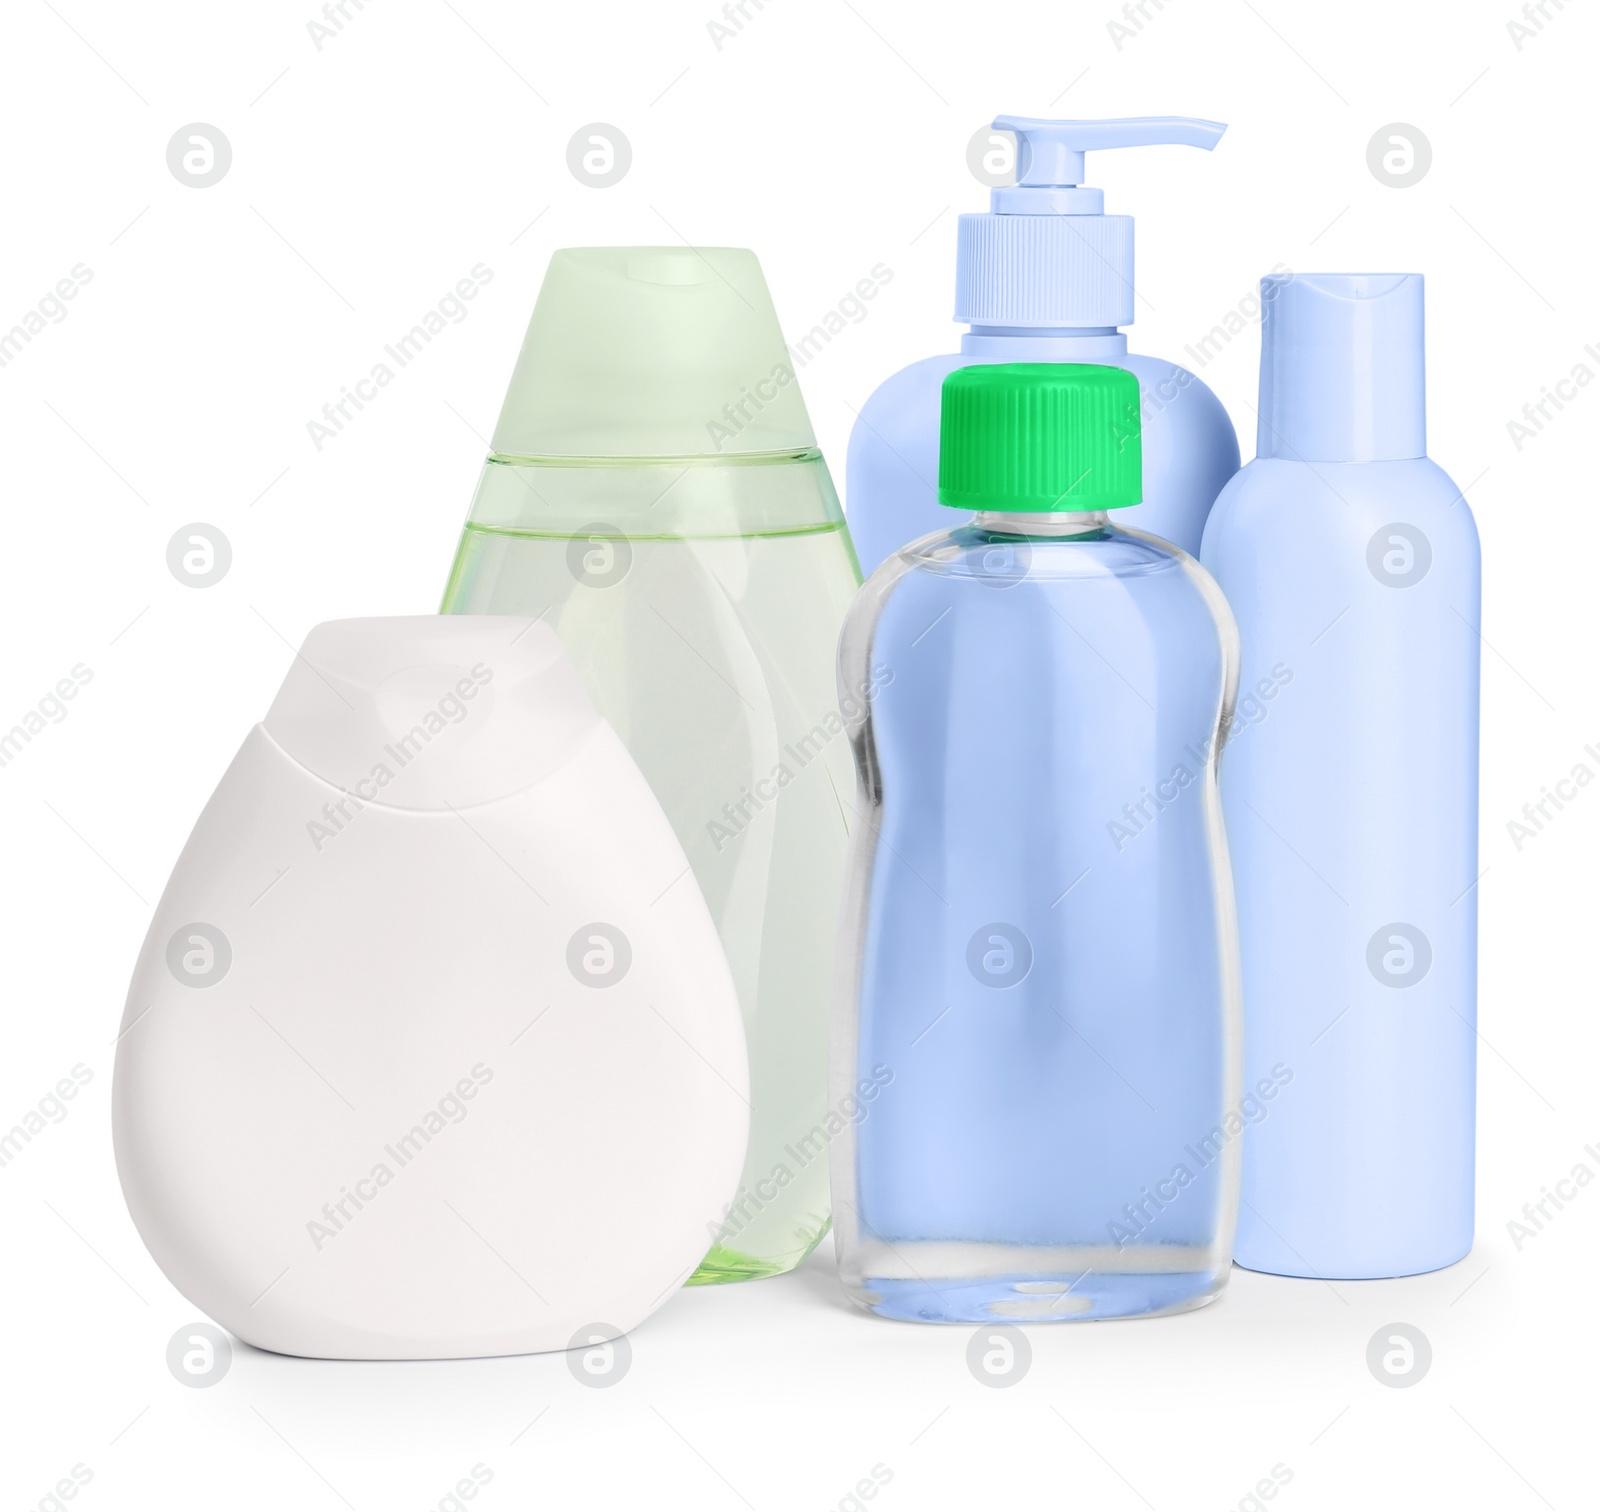 Photo of Bottles with different skin care products for baby isolated on white